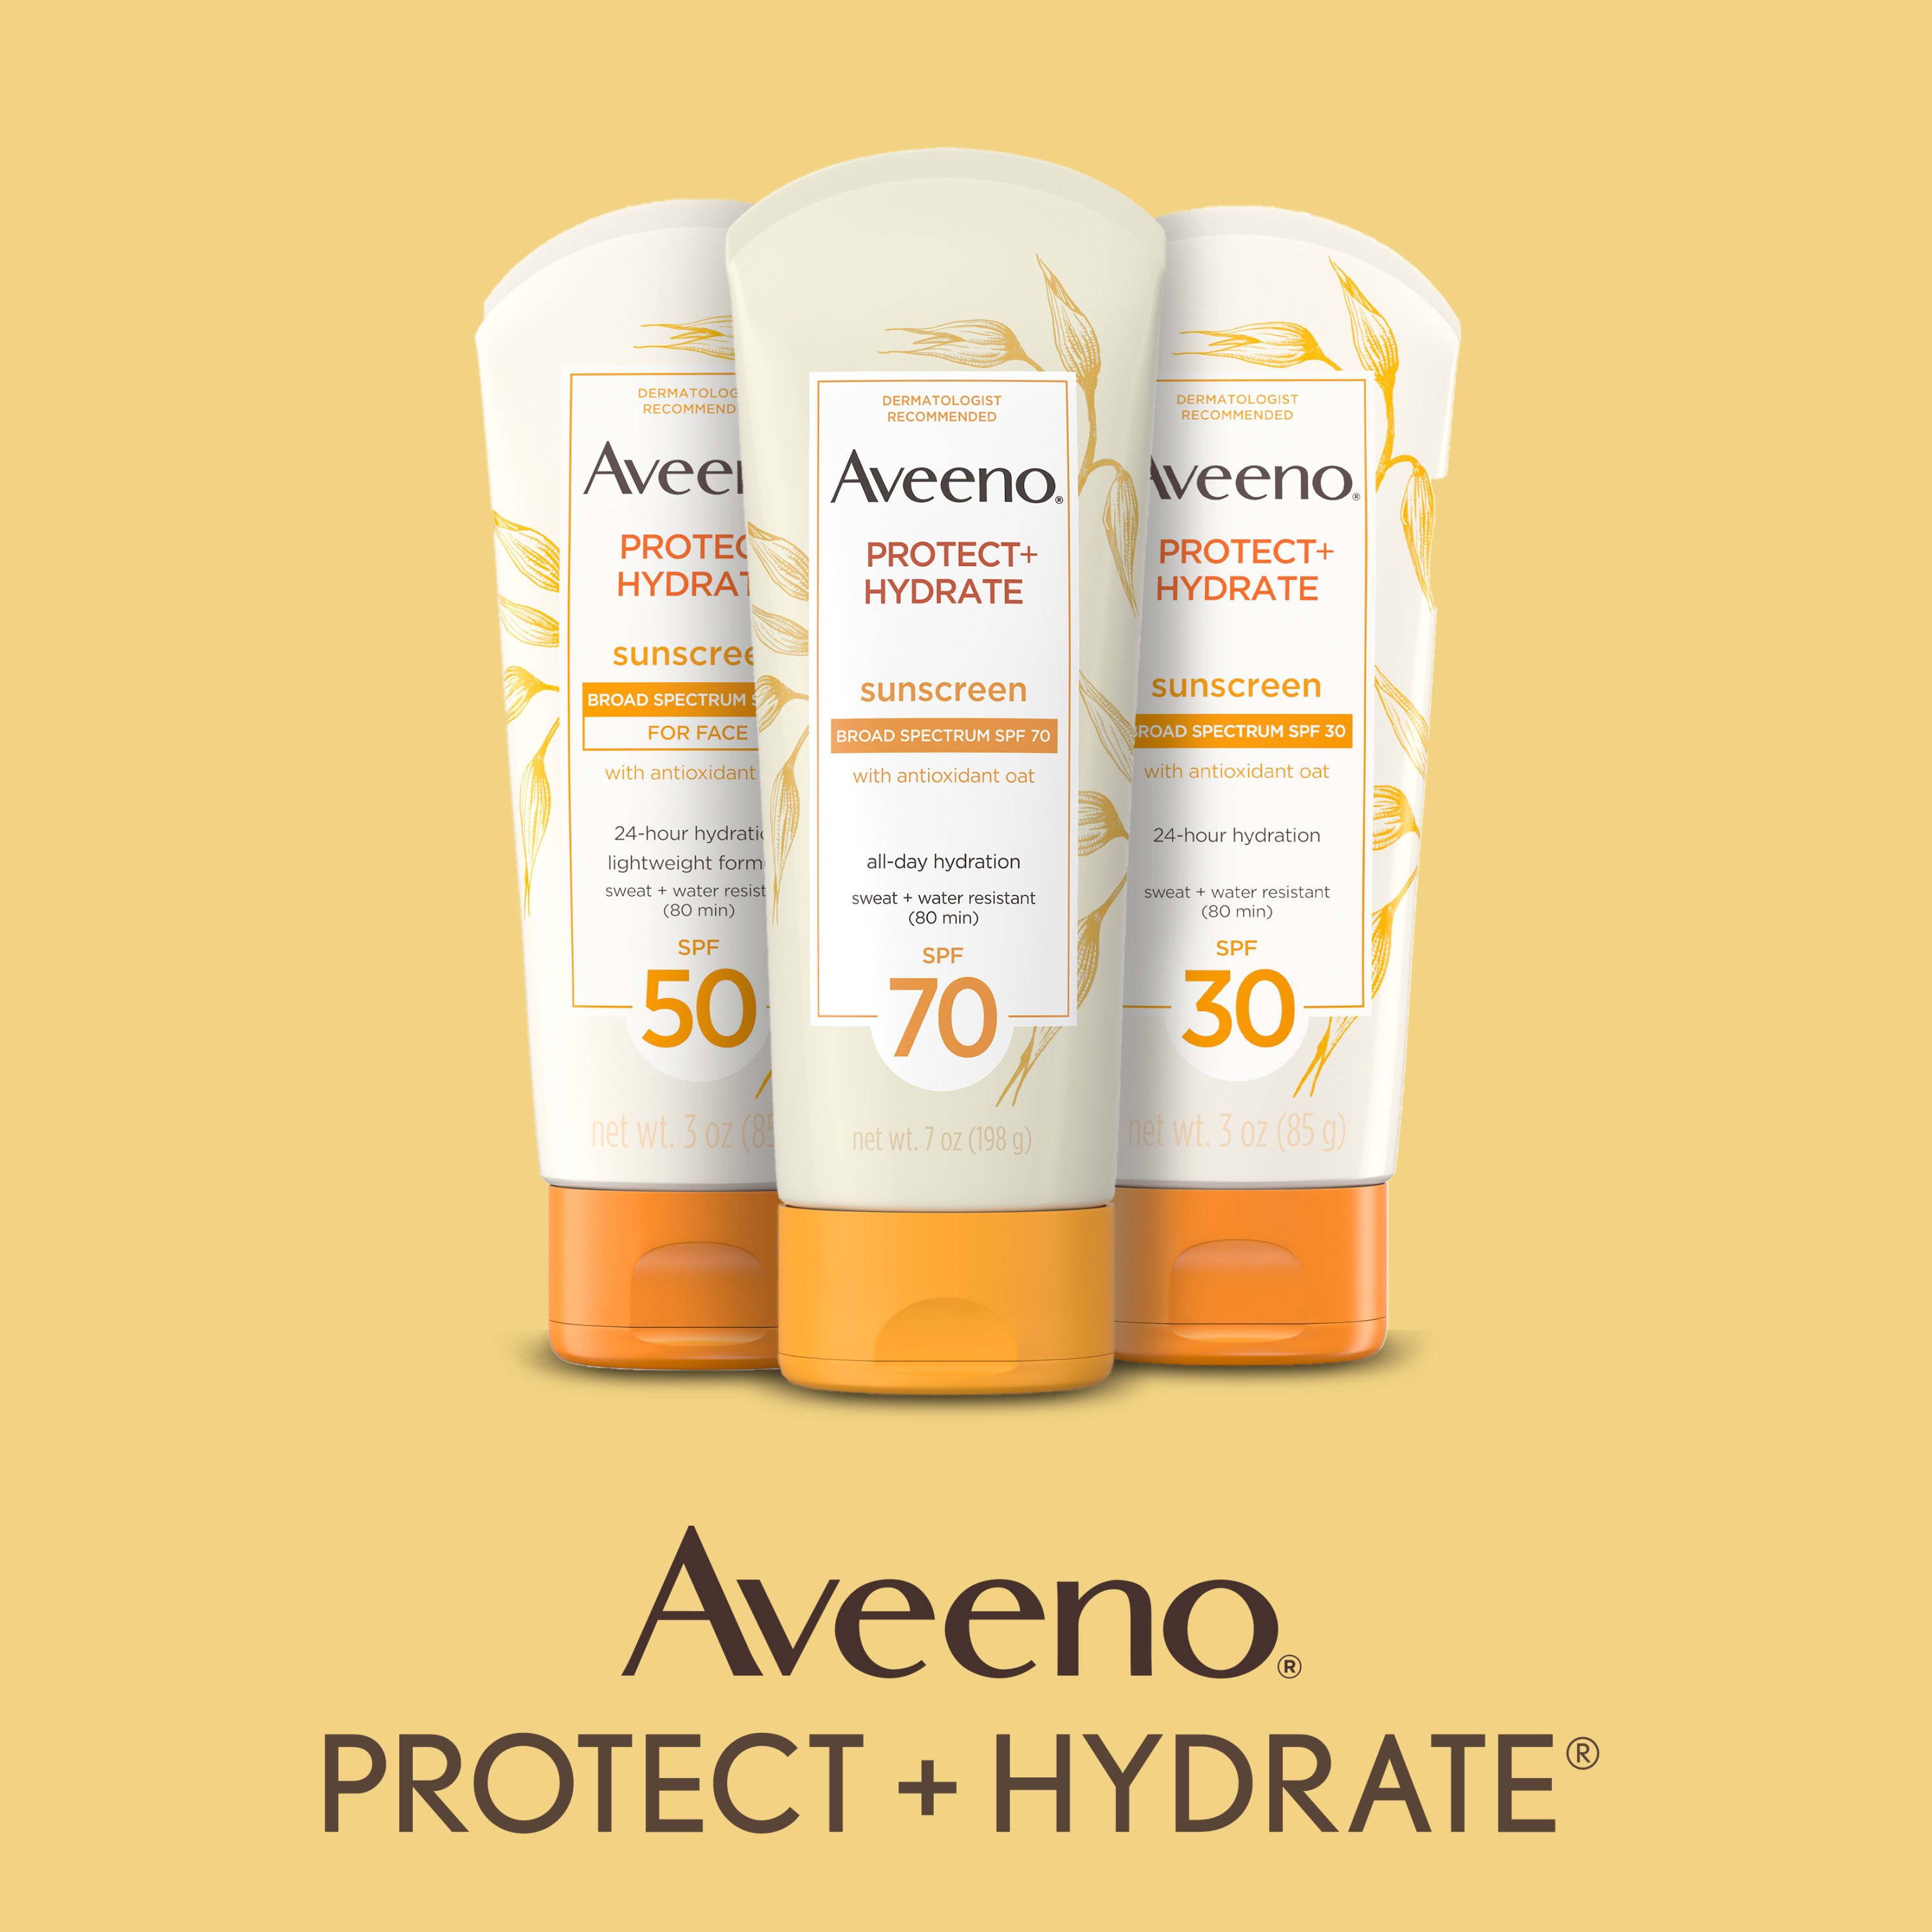 Aveeno Protect + Hydrate SPF 70 Sunscreen Lotion, Oil-Free, 7 oz - image 3 of 19